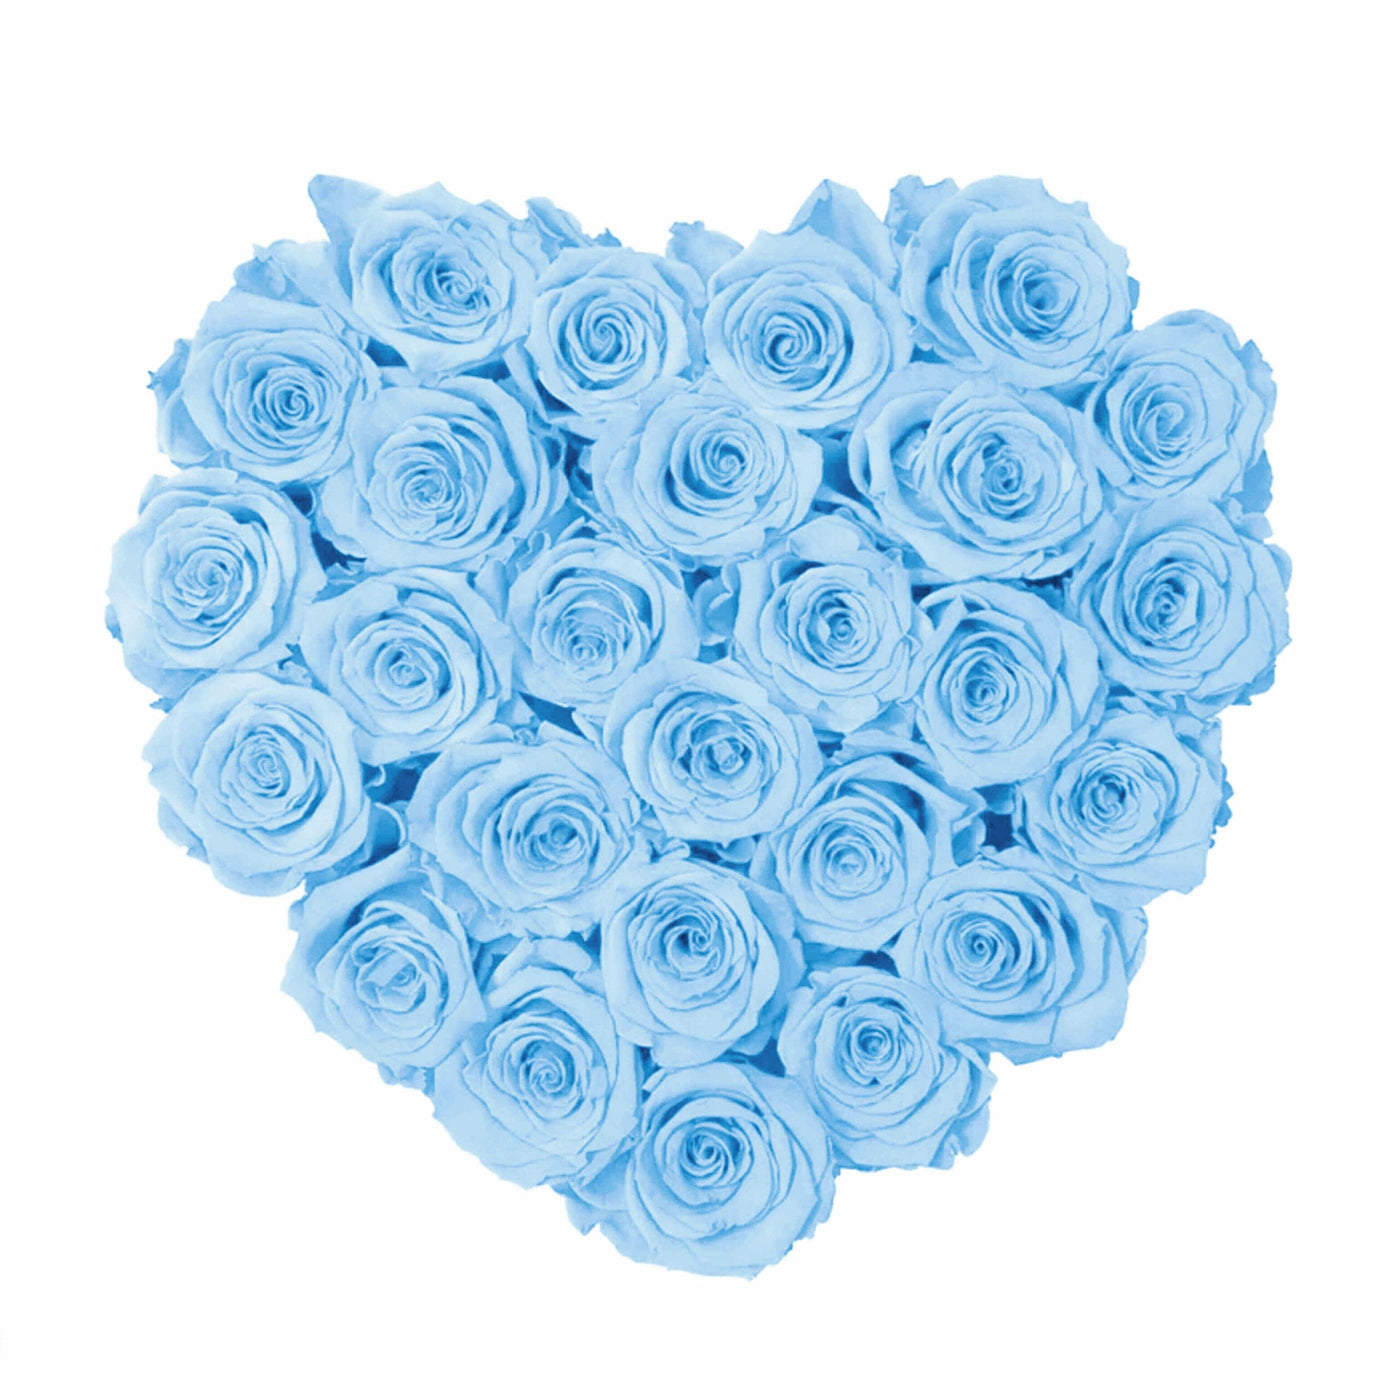 Large Pink Heart Box with Light Blue Roses